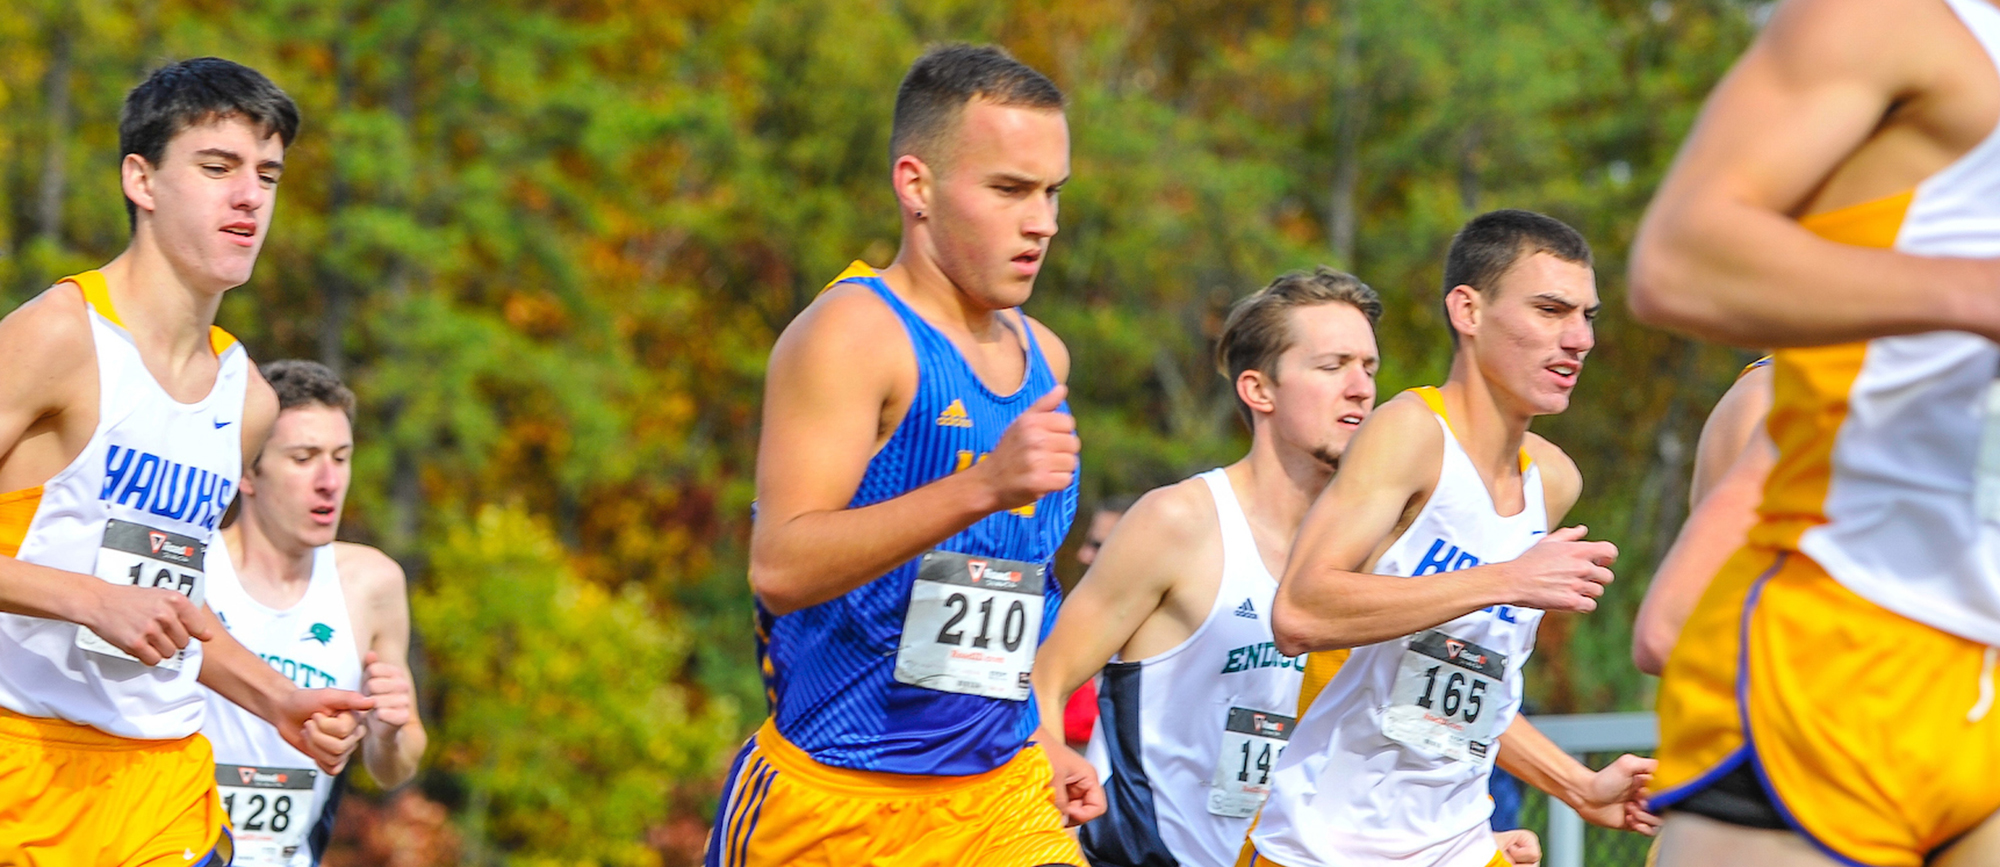 Senior Nico Gallo placed 47th (30:58) in his return to the WNE lineup on Saturday at the Jim Sheehan Memorial Invitational. (Photo by Bill Sharon/Spartan Sportshots)